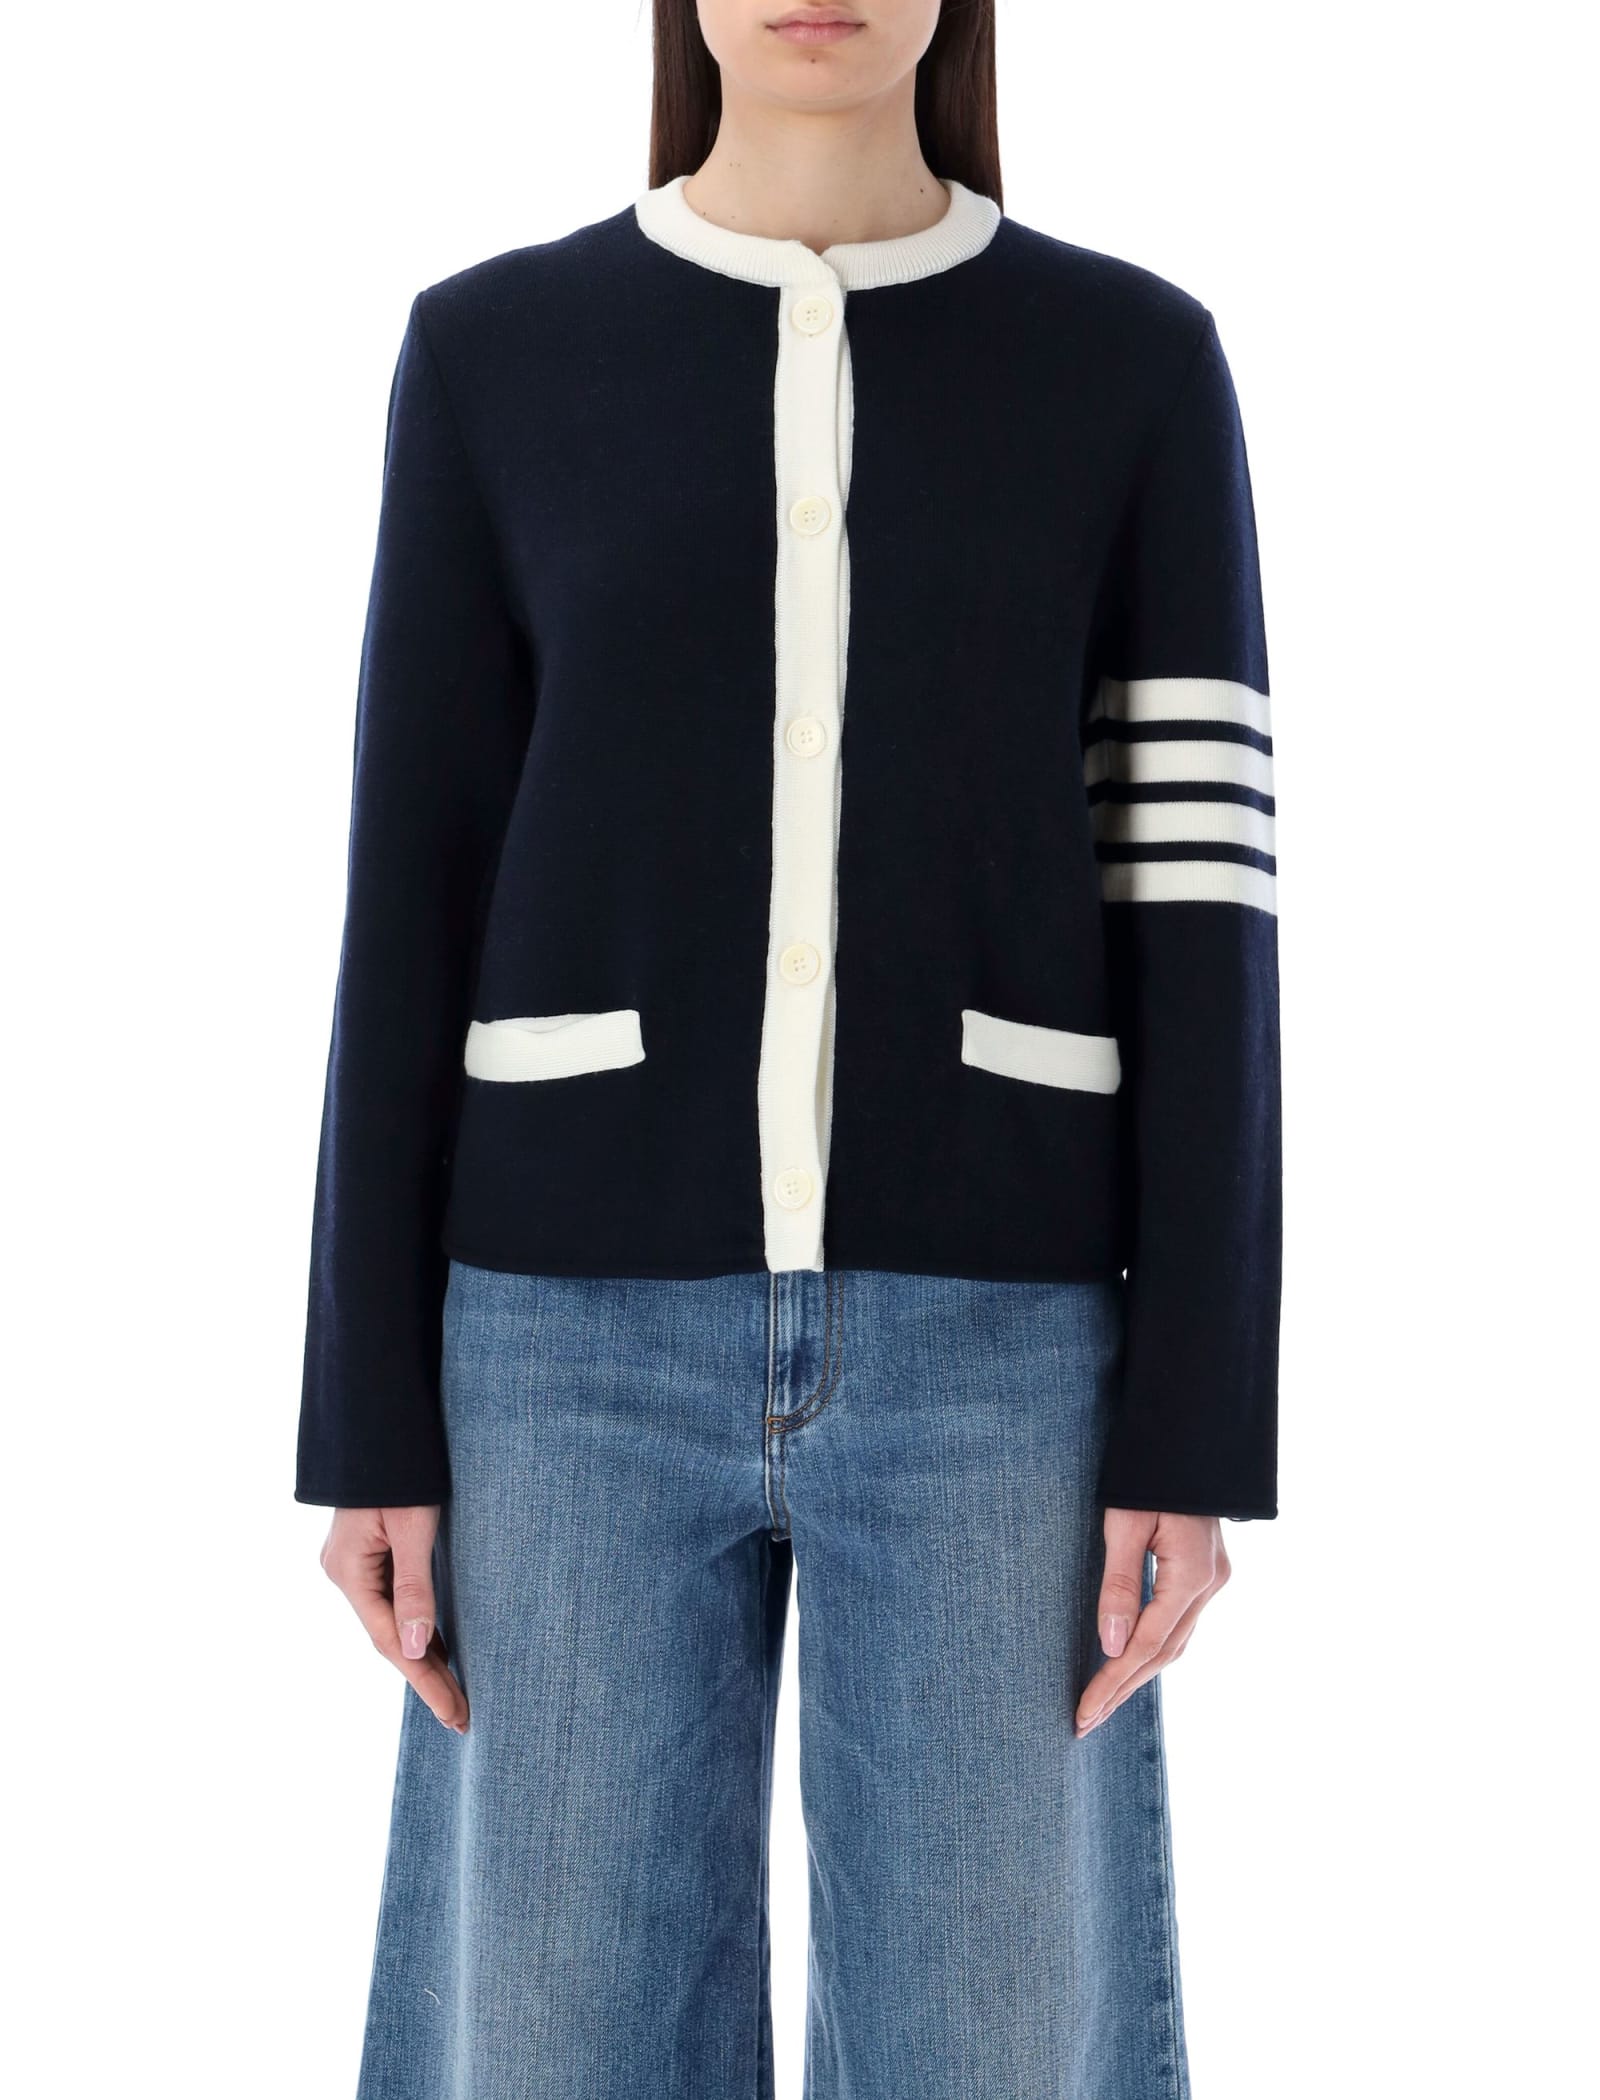 THOM BROWNE DOUBLE FACE 4-BAR CARDIGAN JACKET